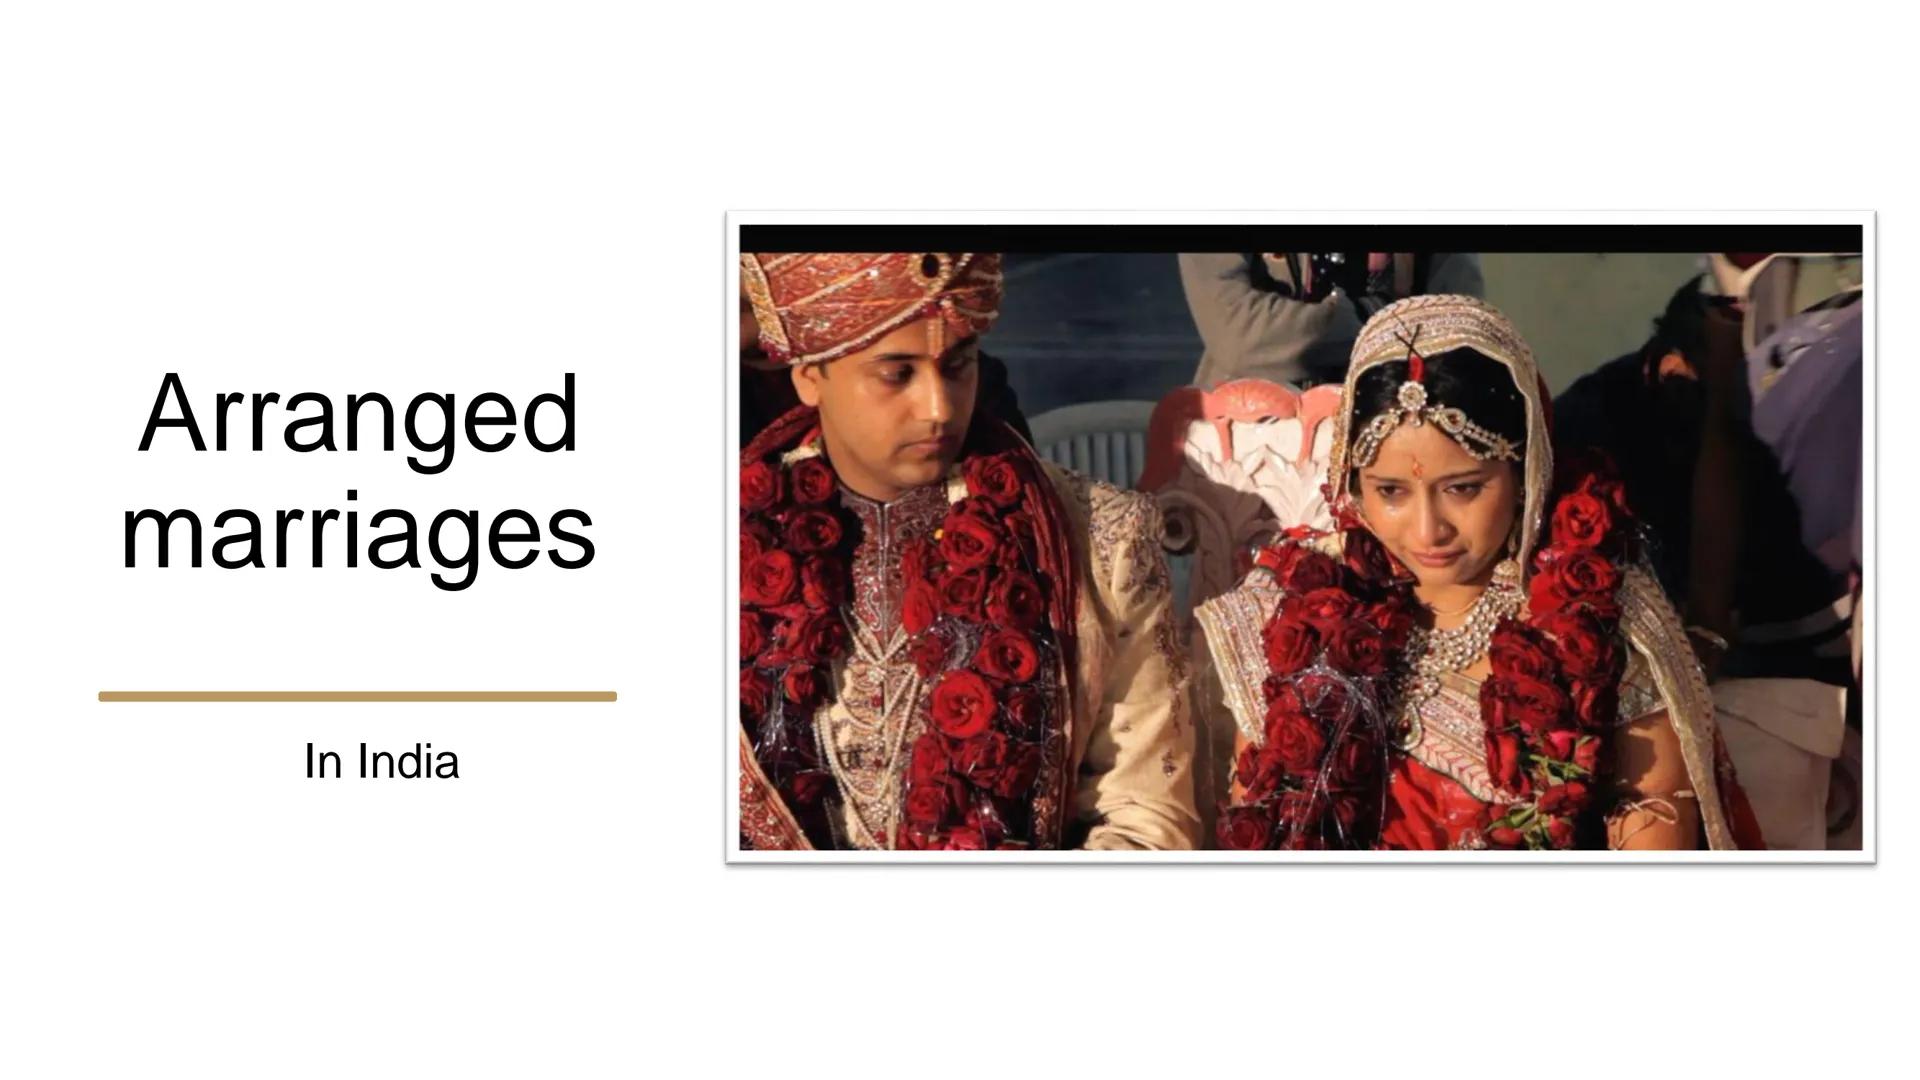 Arranged
marriages
In India Contents
1. General information
2. Pros and cons
3. The celebration
4. Our opinion
5. Source
6. Image Source Gen